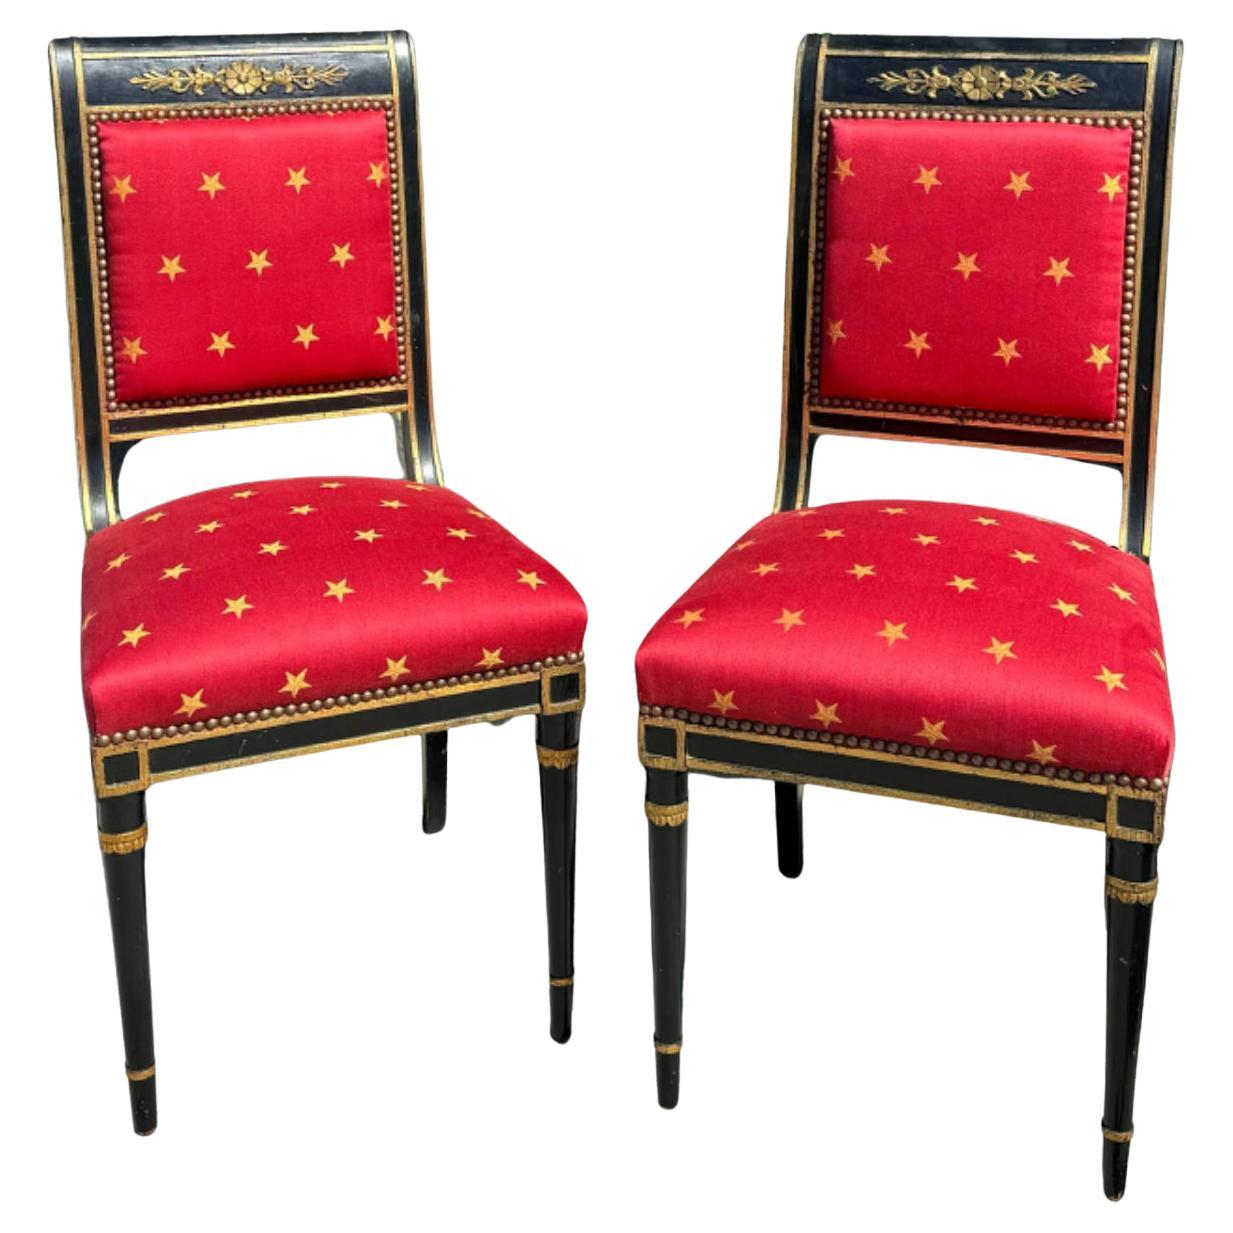 Pair of Antique Empire Black & Gold Chairs W Red Clarence House Seats For Sale